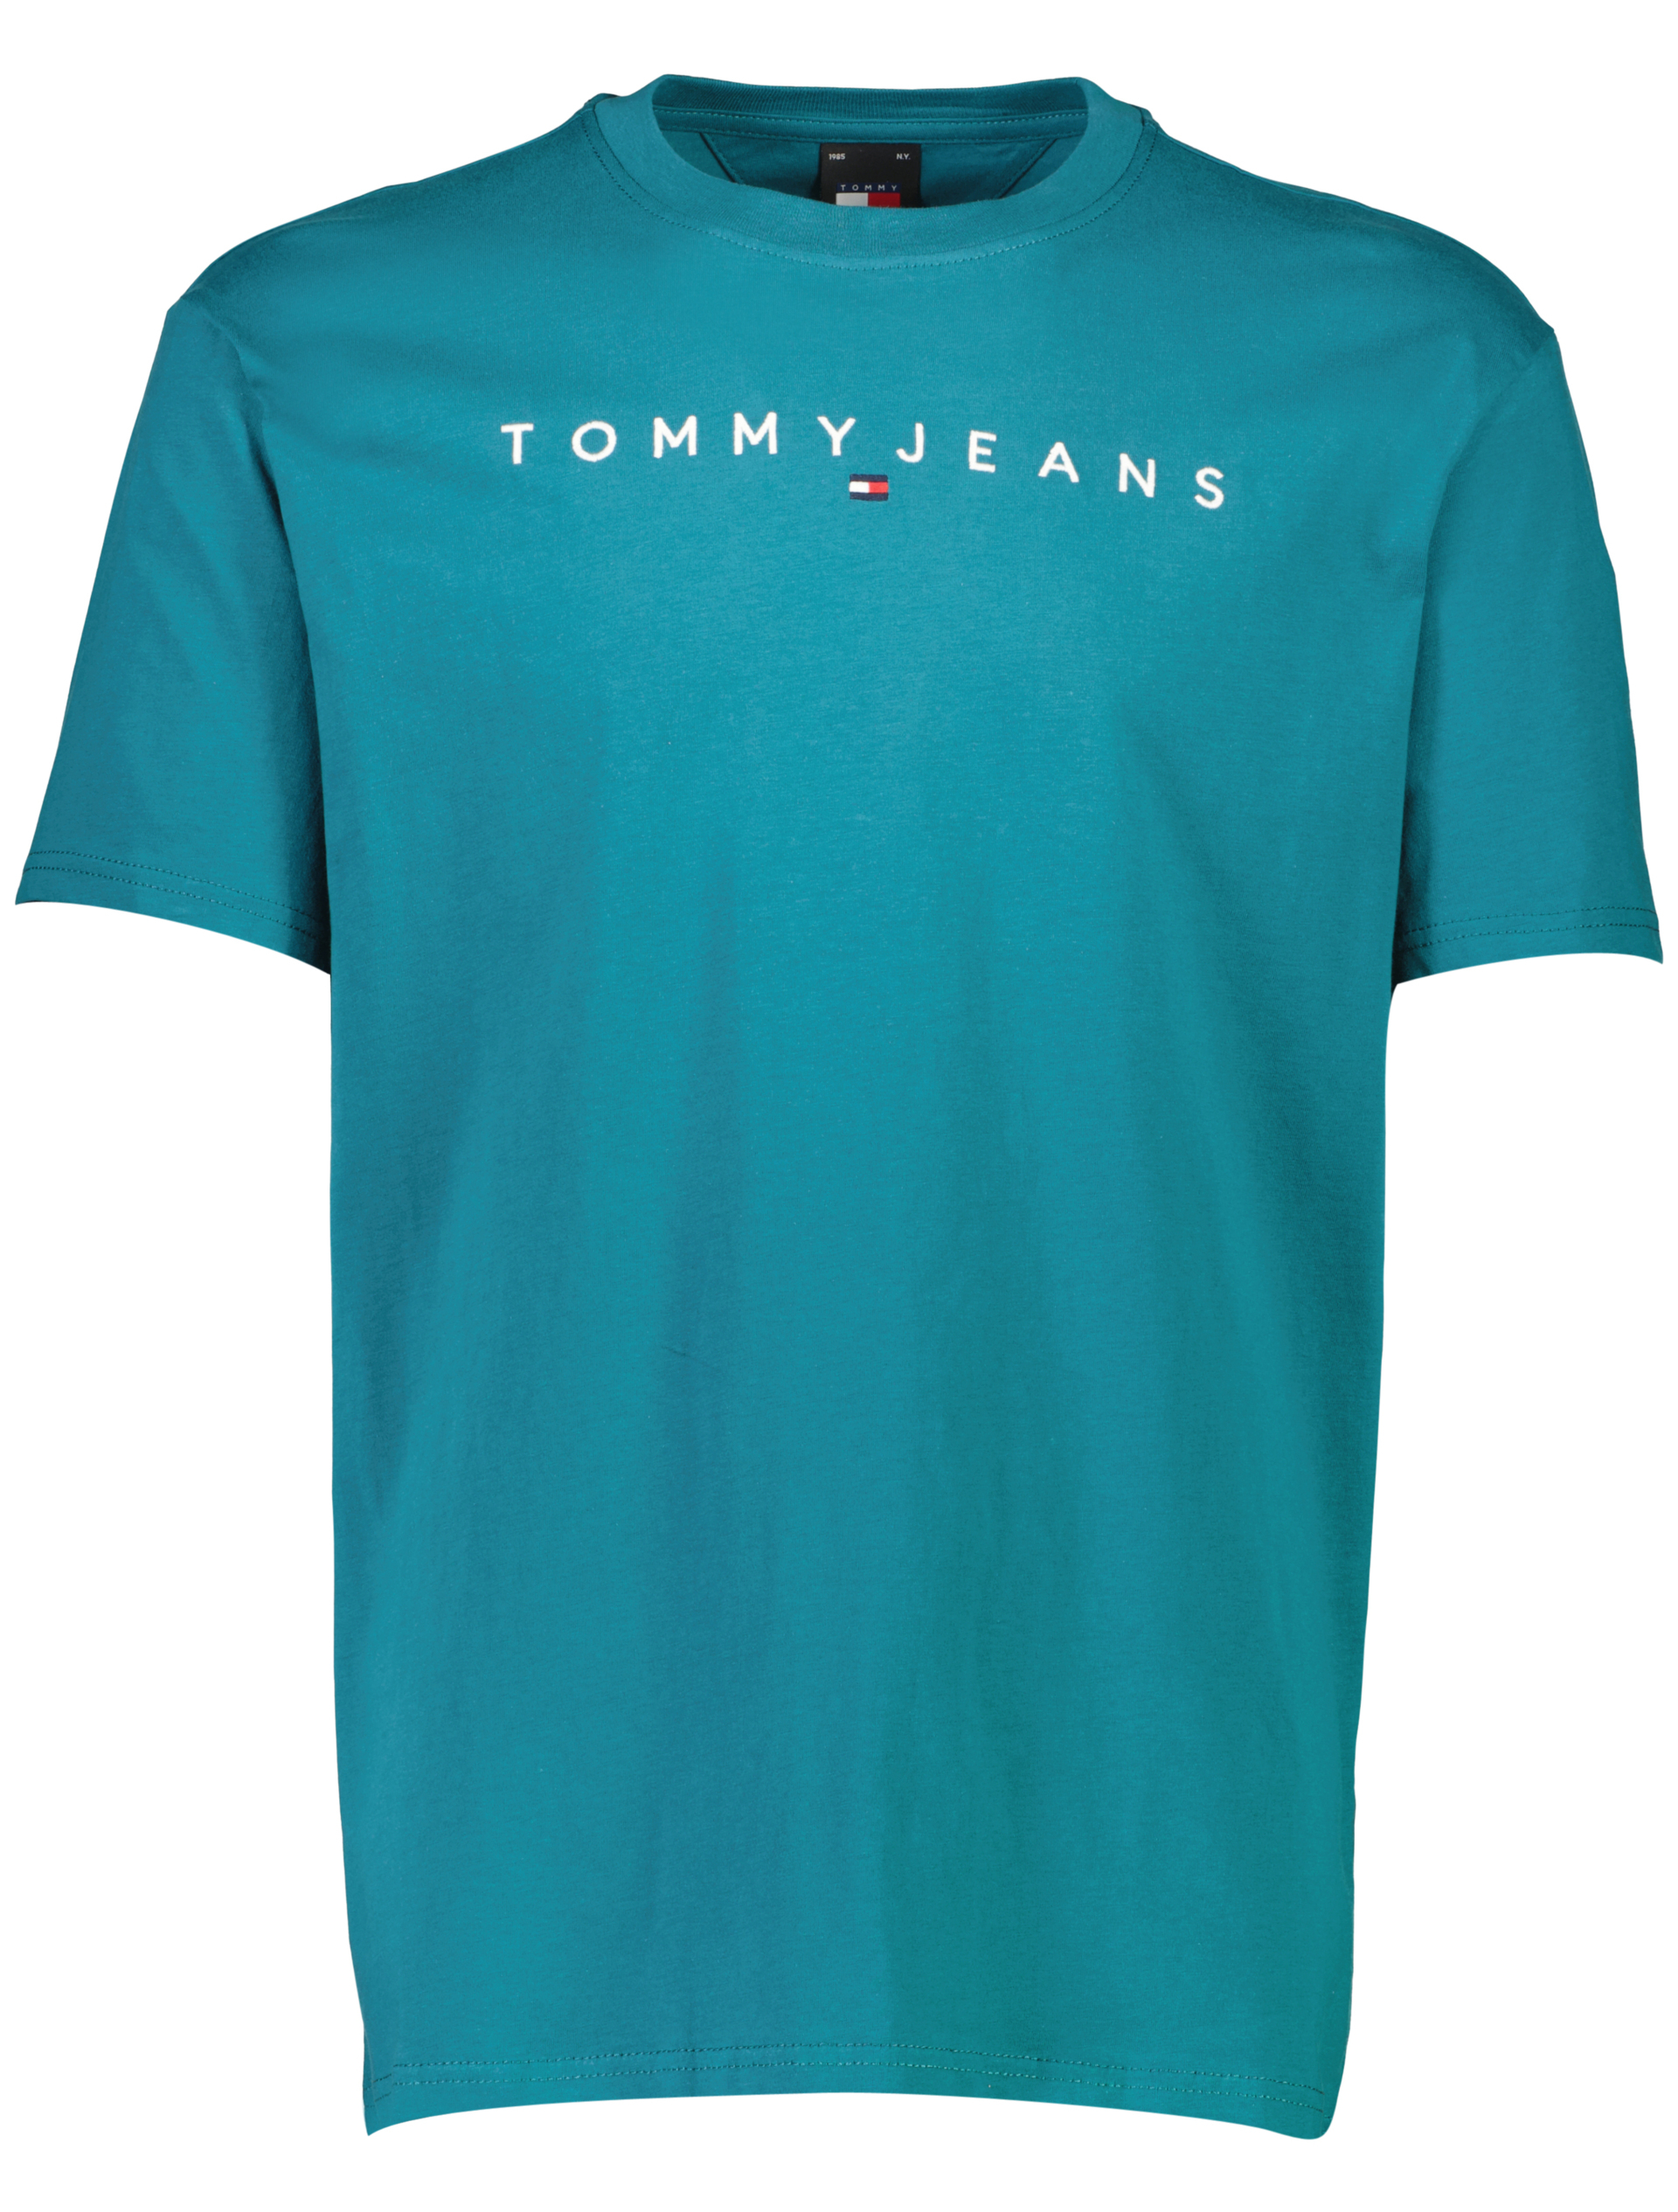 Tommy Jeans T-shirt grøn / ct0 timeless teal